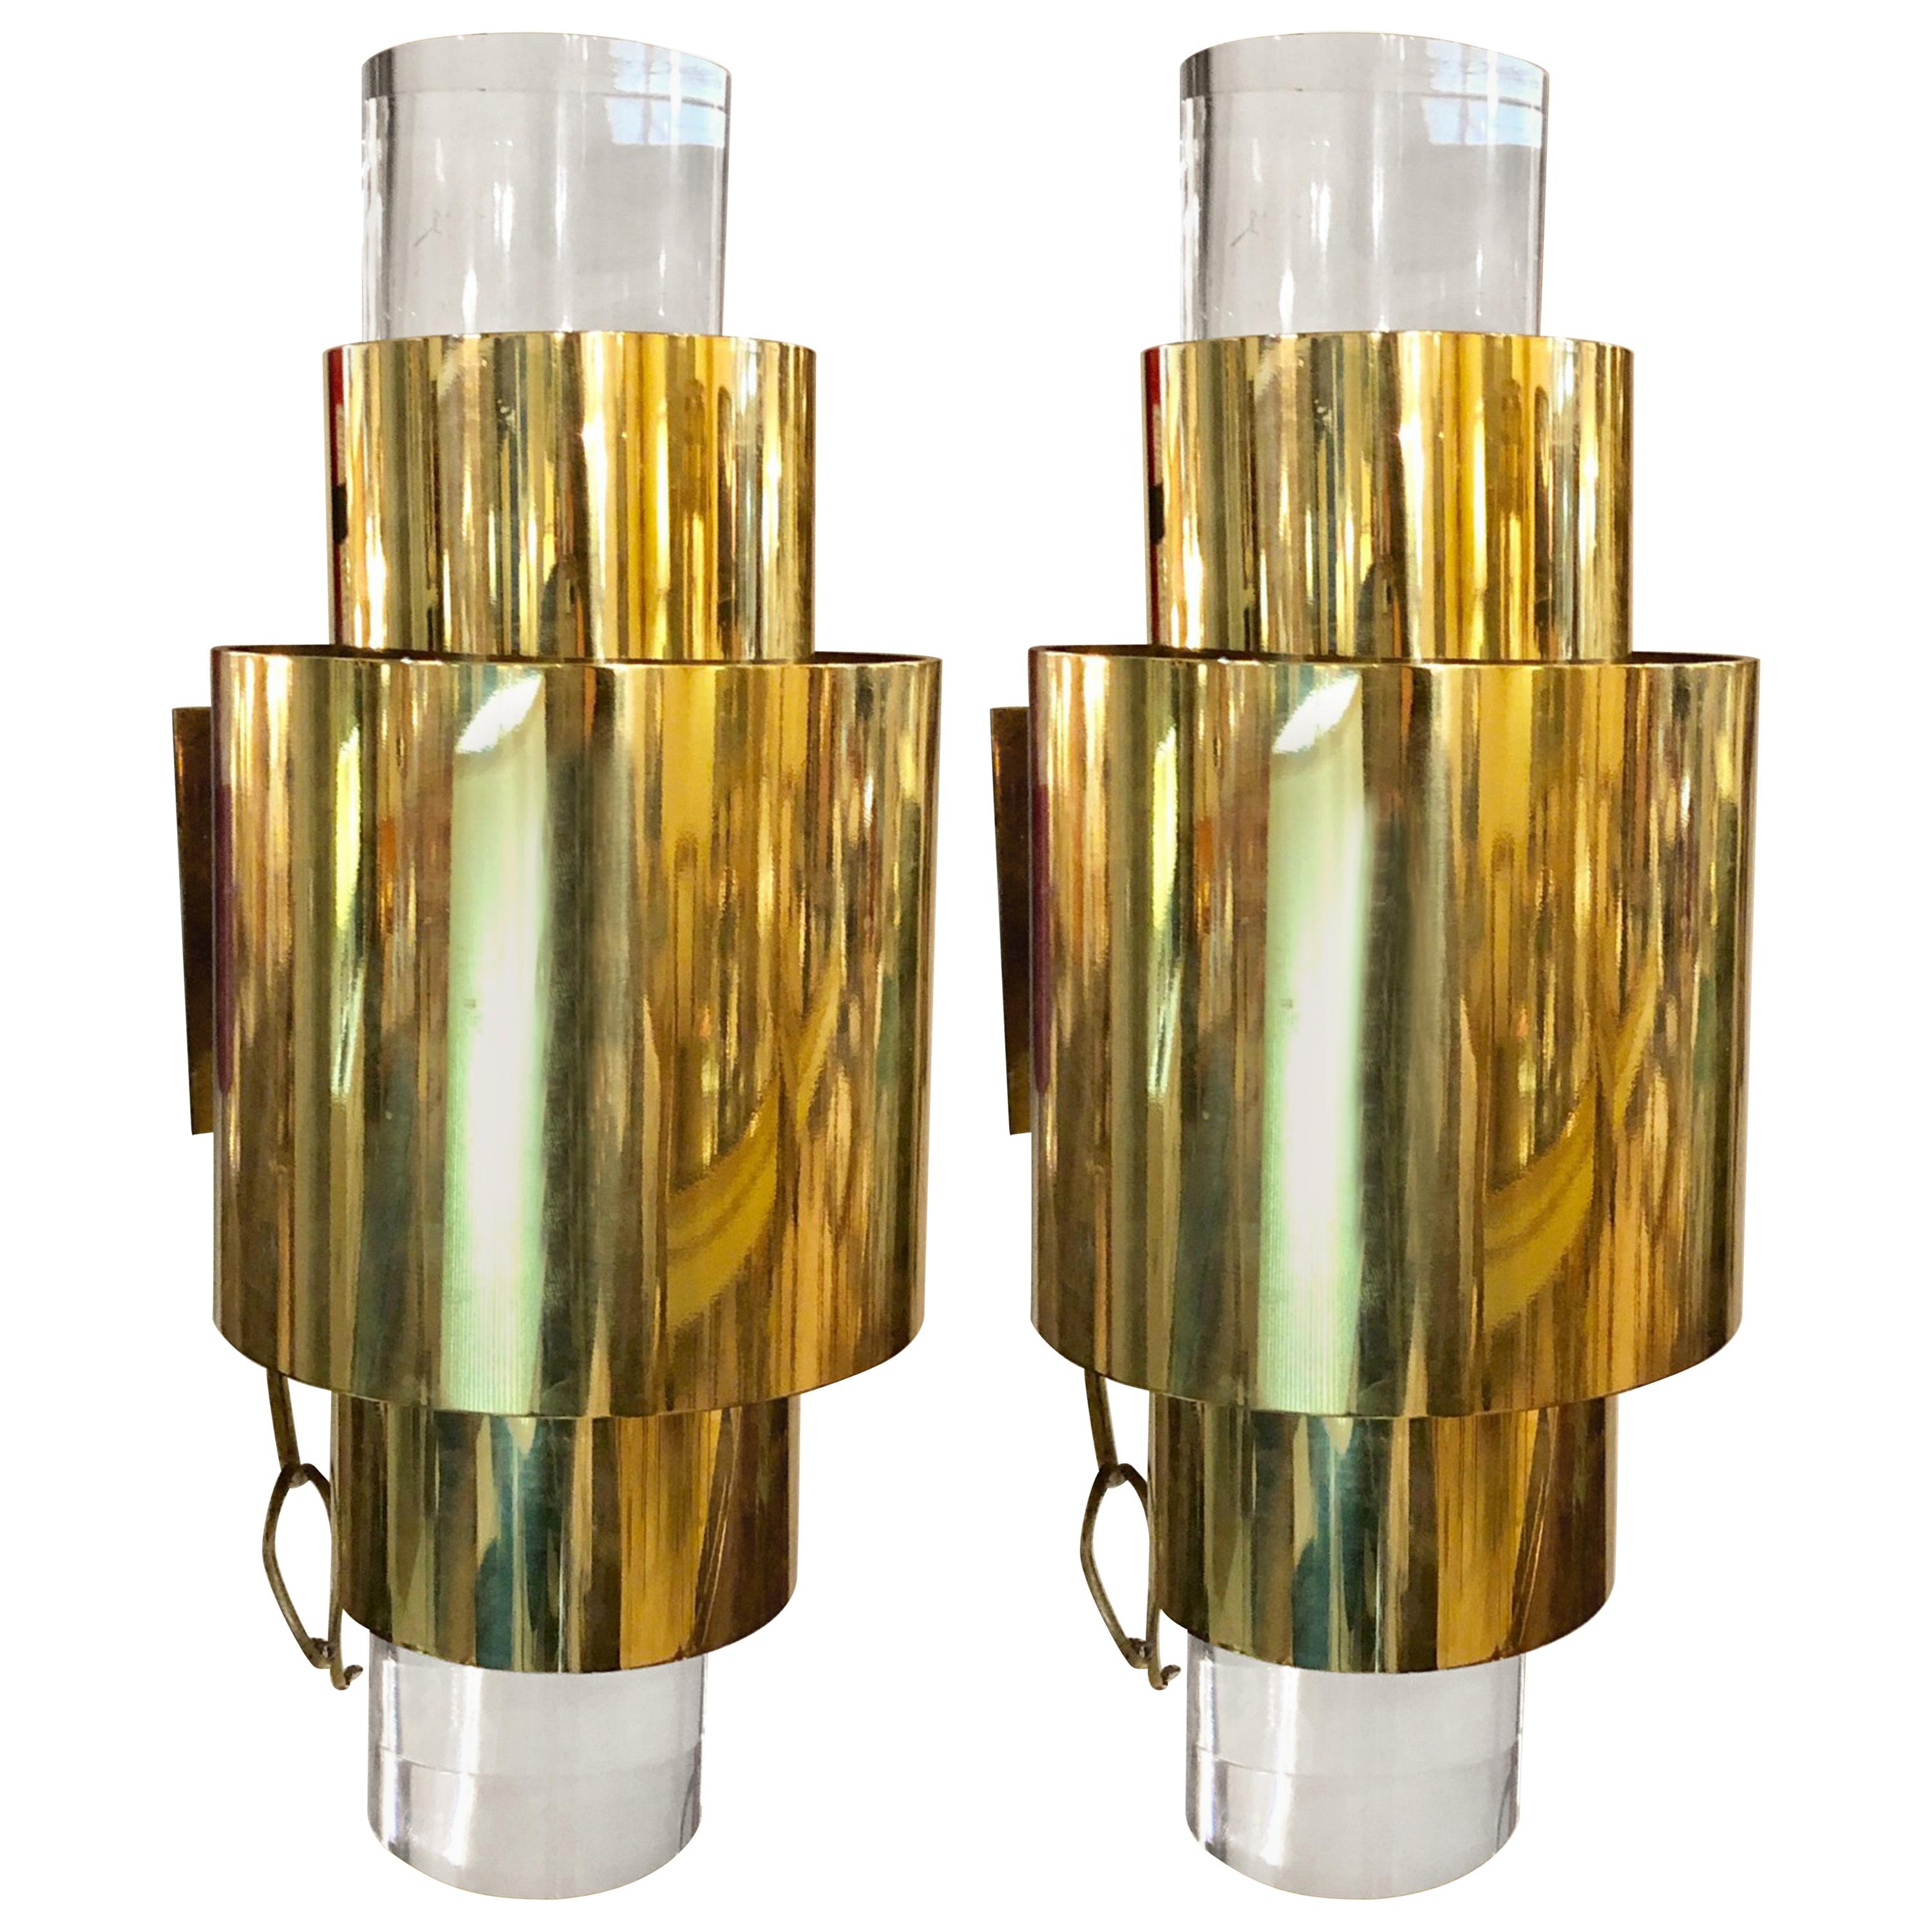 Pair of Mid-Century Modern Brass and Lucite Wall Sconces